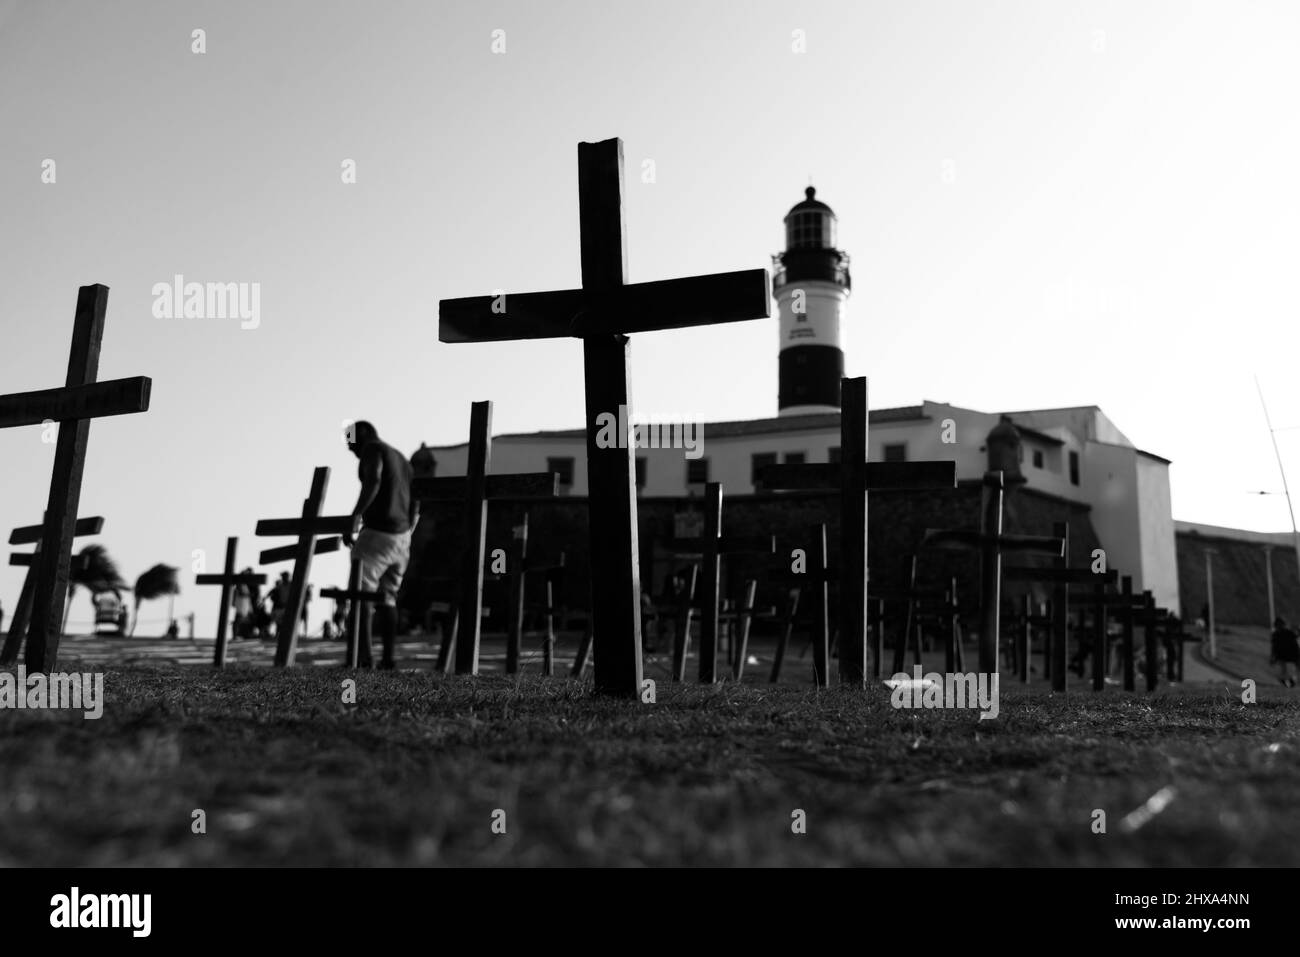 Crosses fixed to the ground in honor of those killed by Covid-19 at Farol da Barra in Salvador, Bahia, Bra Stock Photo